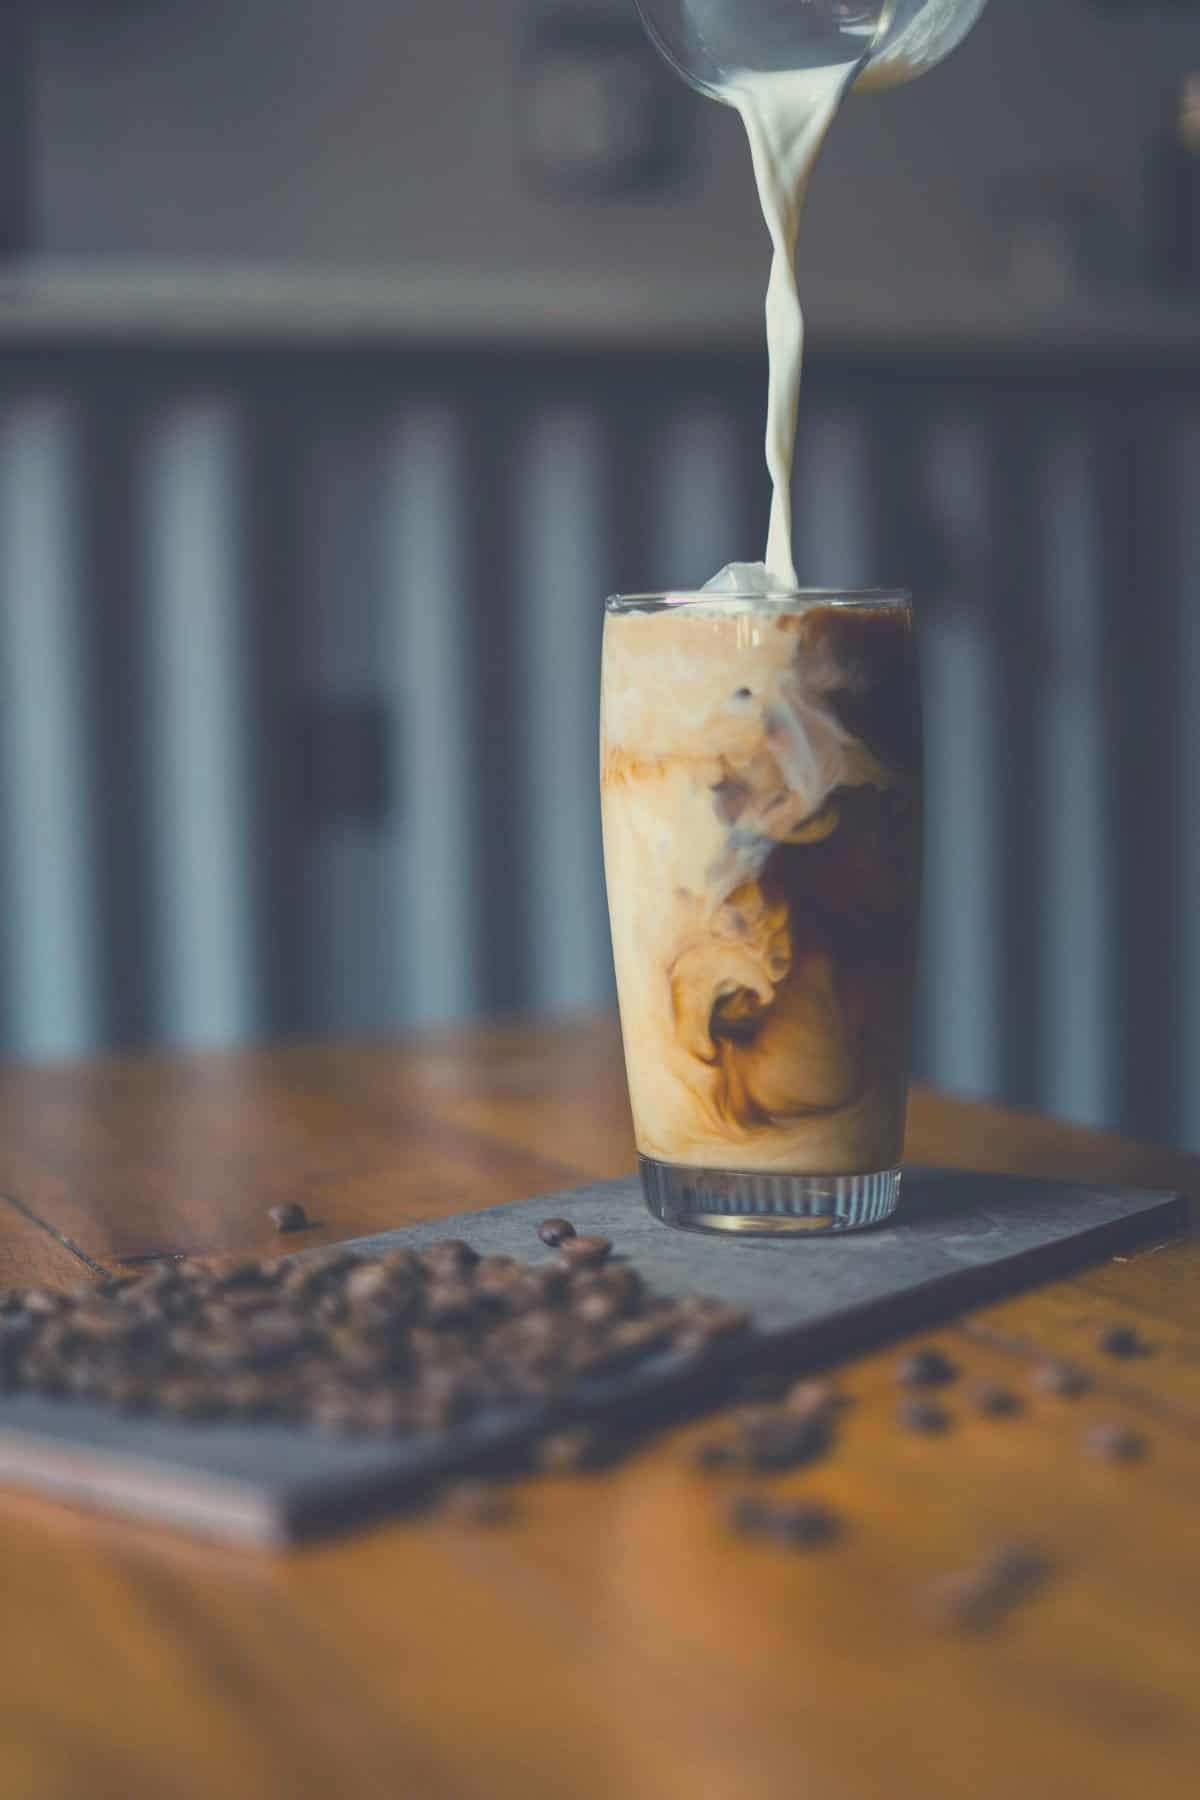 Cream being poured into an iced-coffee.